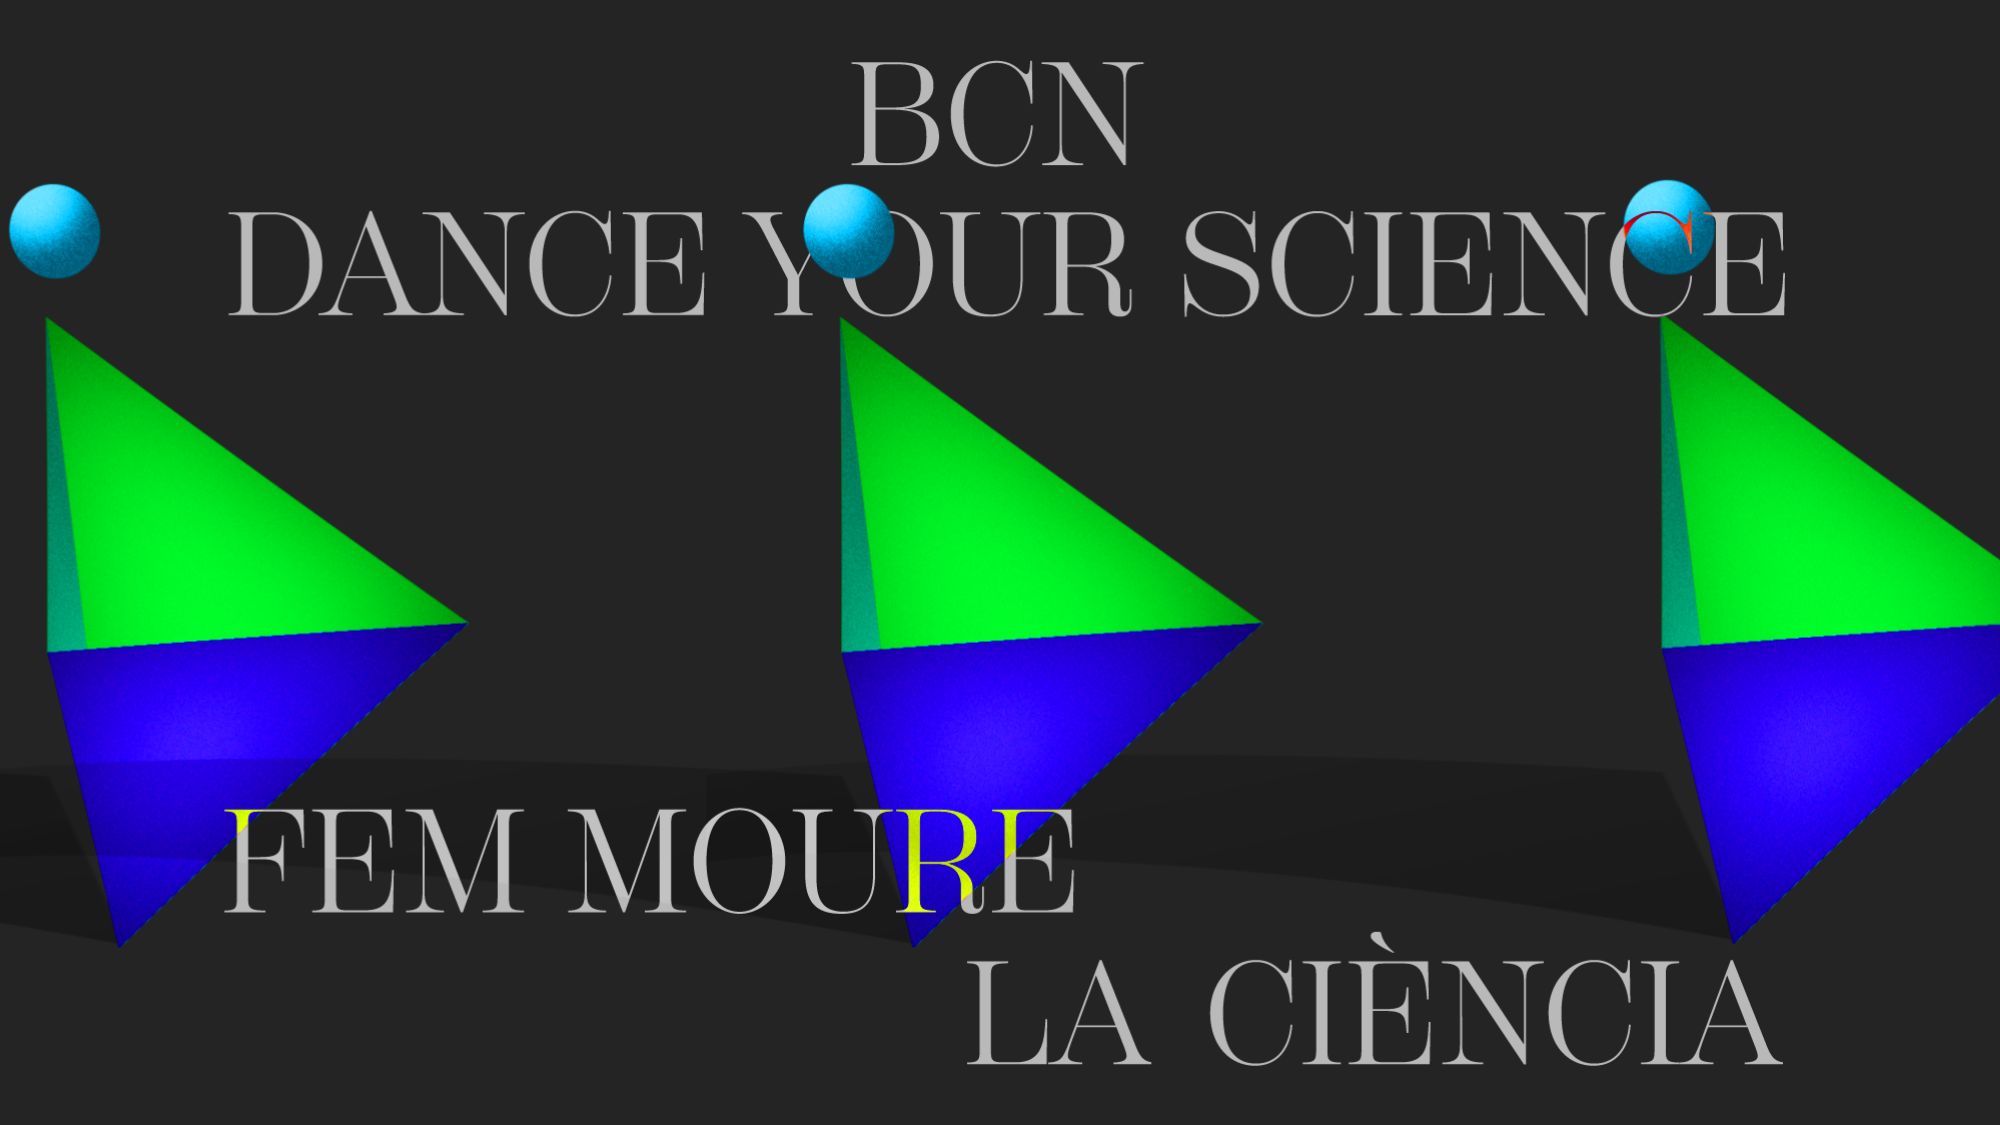 BCN Dance your Science: let’s move science!